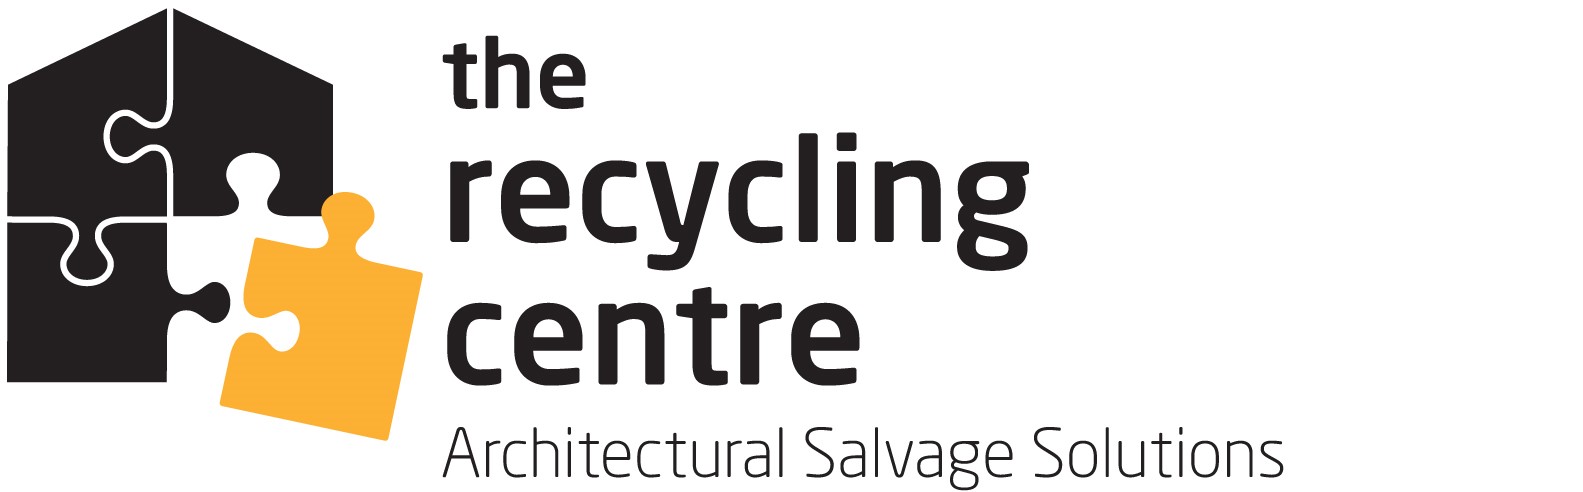 The Recycling Centre